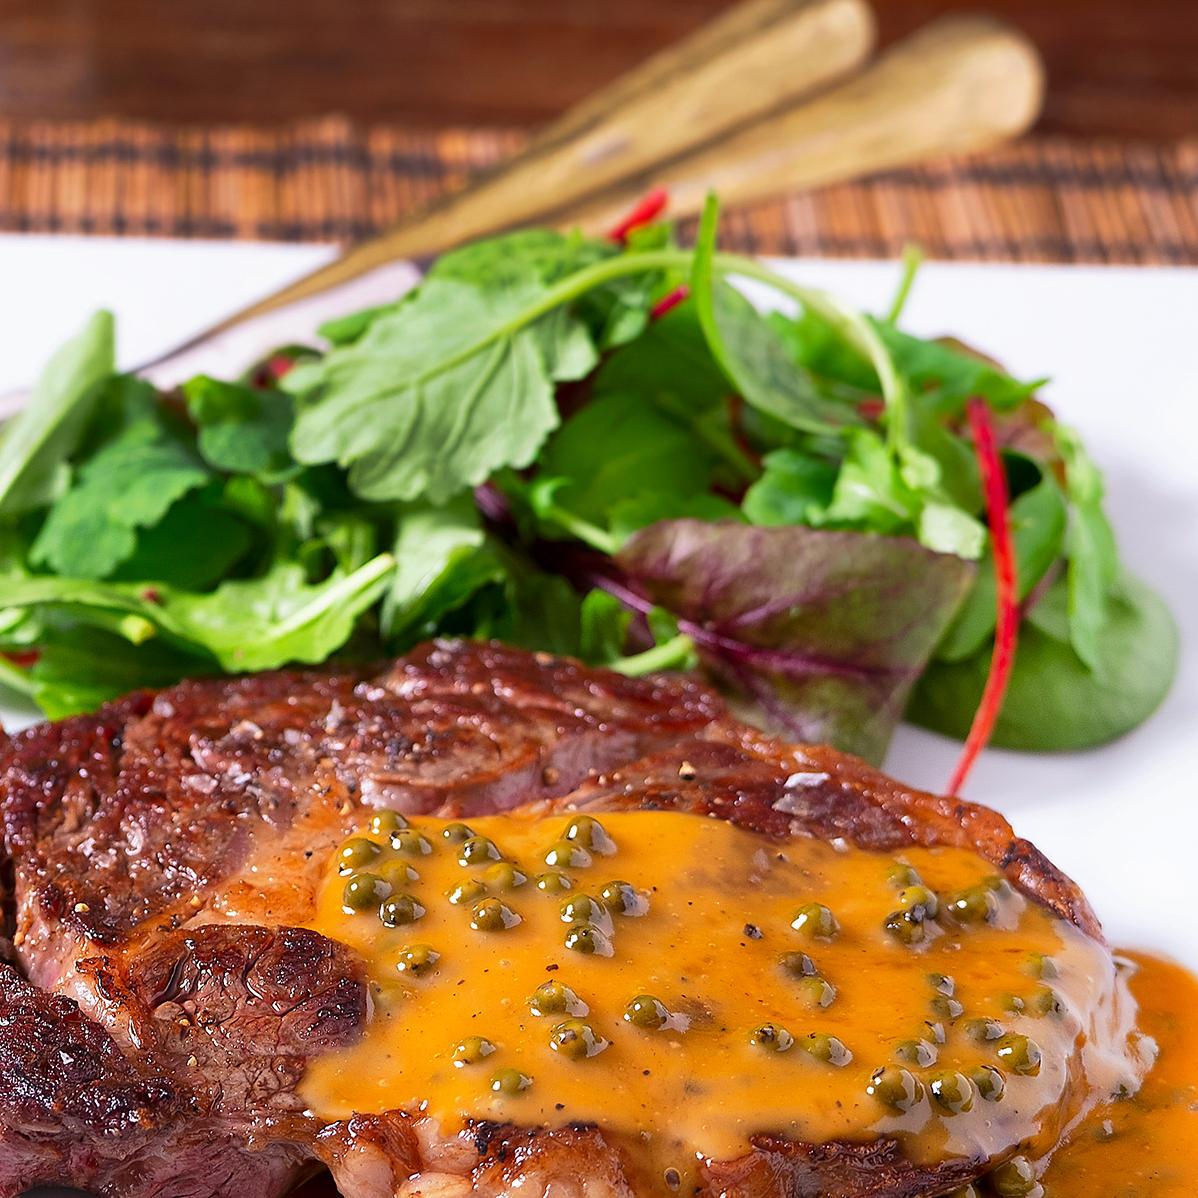  Melt that butter onto your steak for a juicy, smoky, and absolutely delicious dining experience.